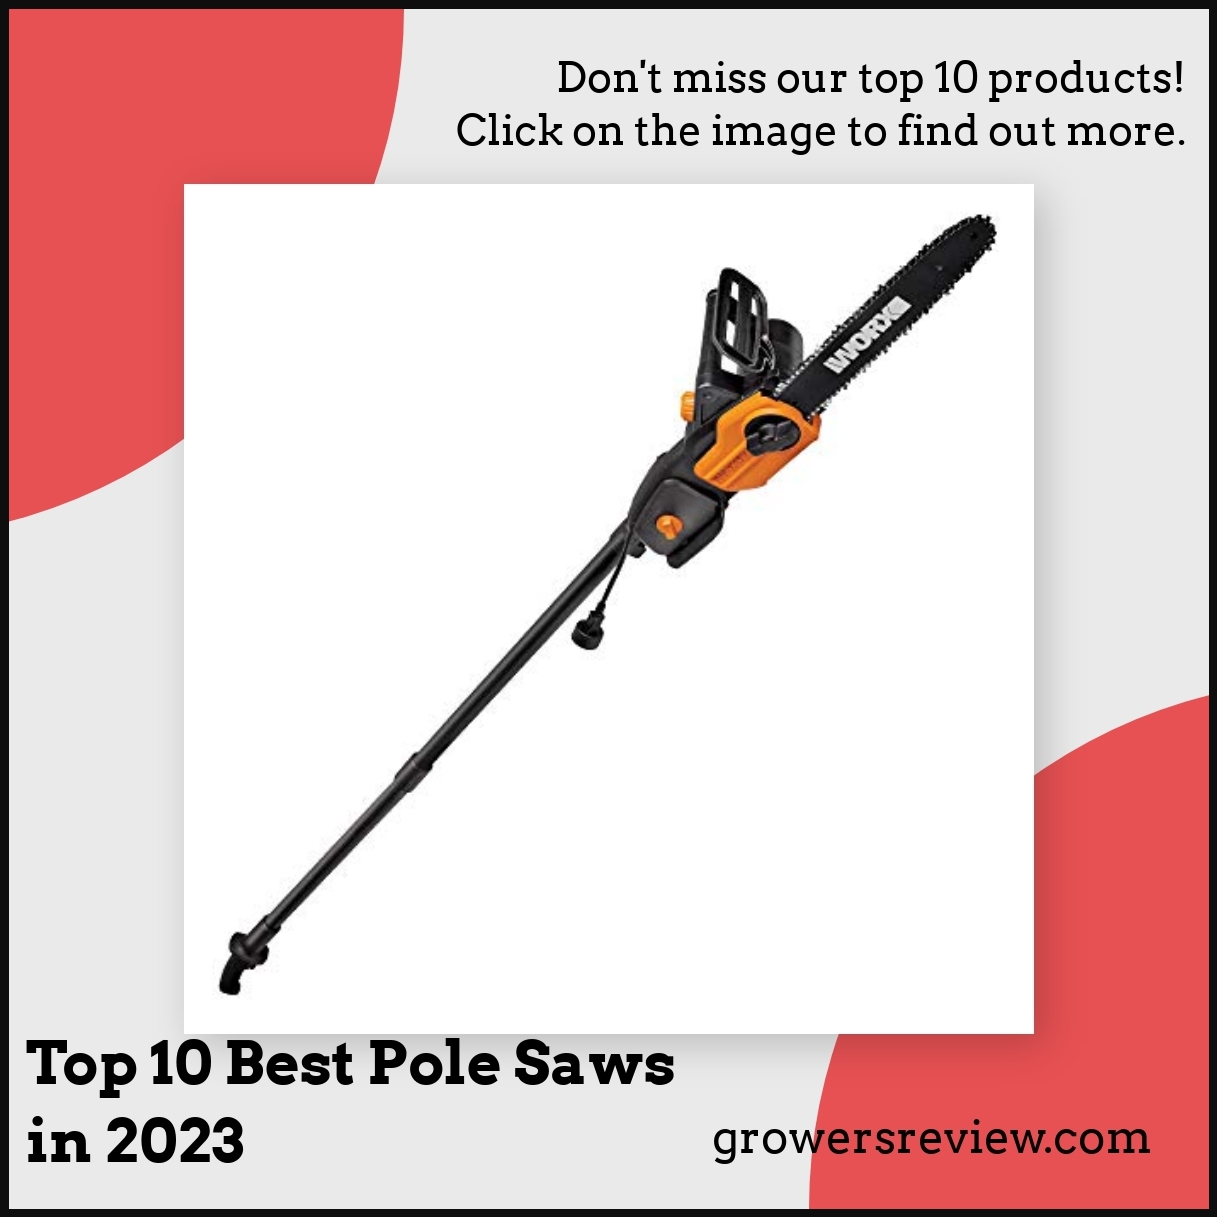 Top 10 Best Pole Saws in 2023